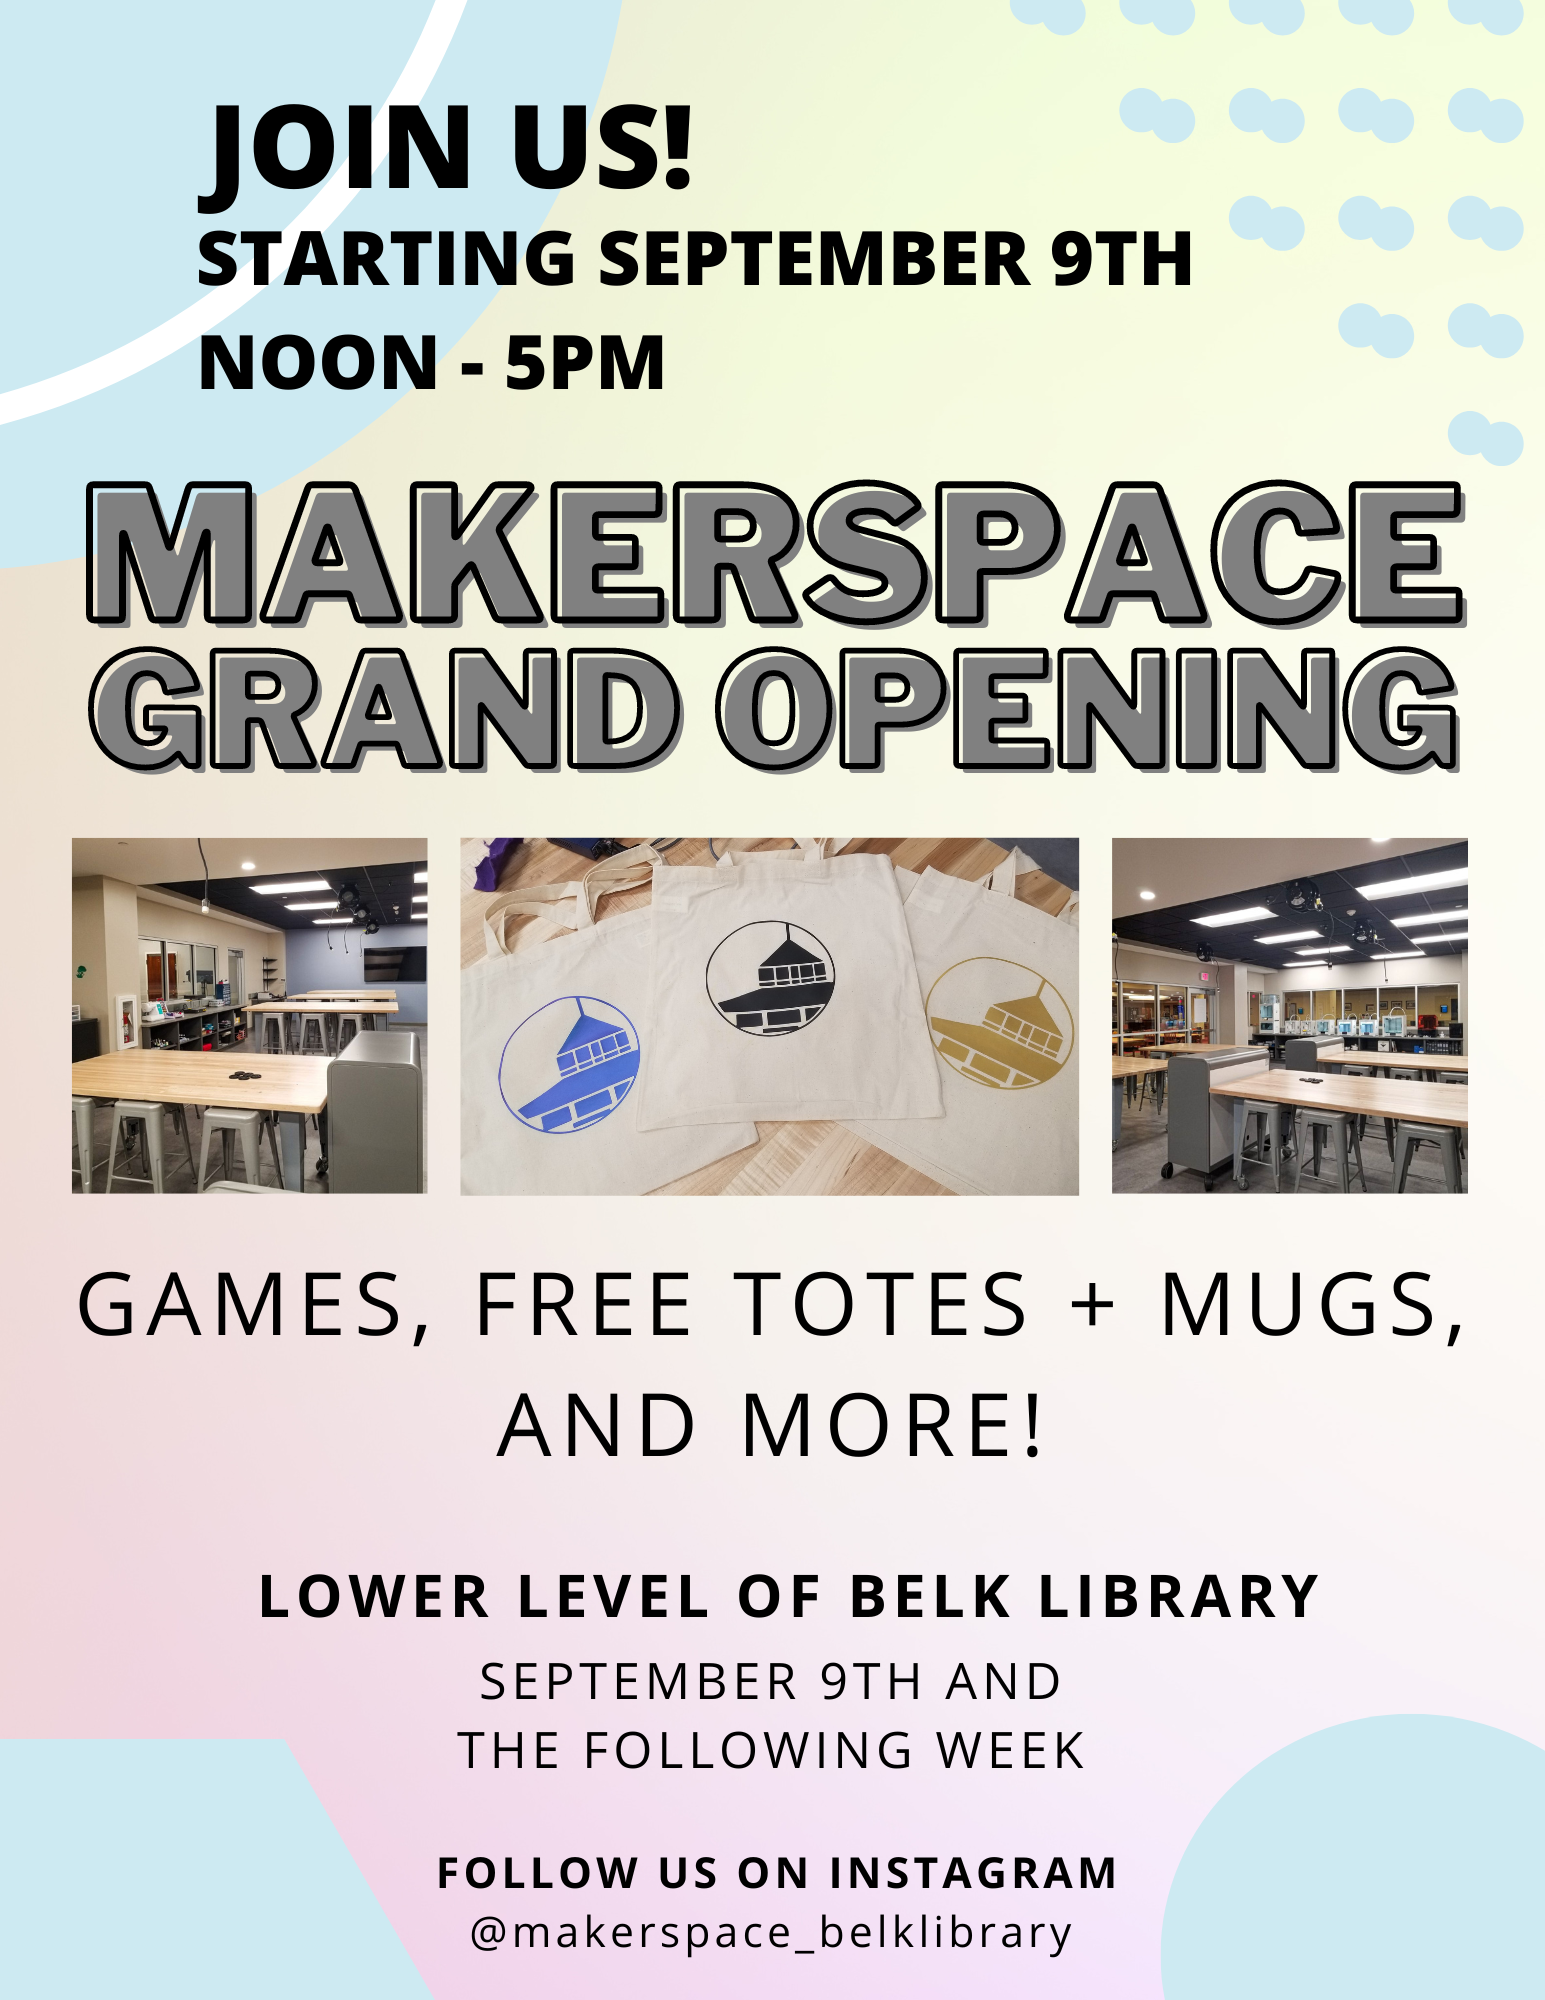 Makerspace Grand Opening September 9th at Noon